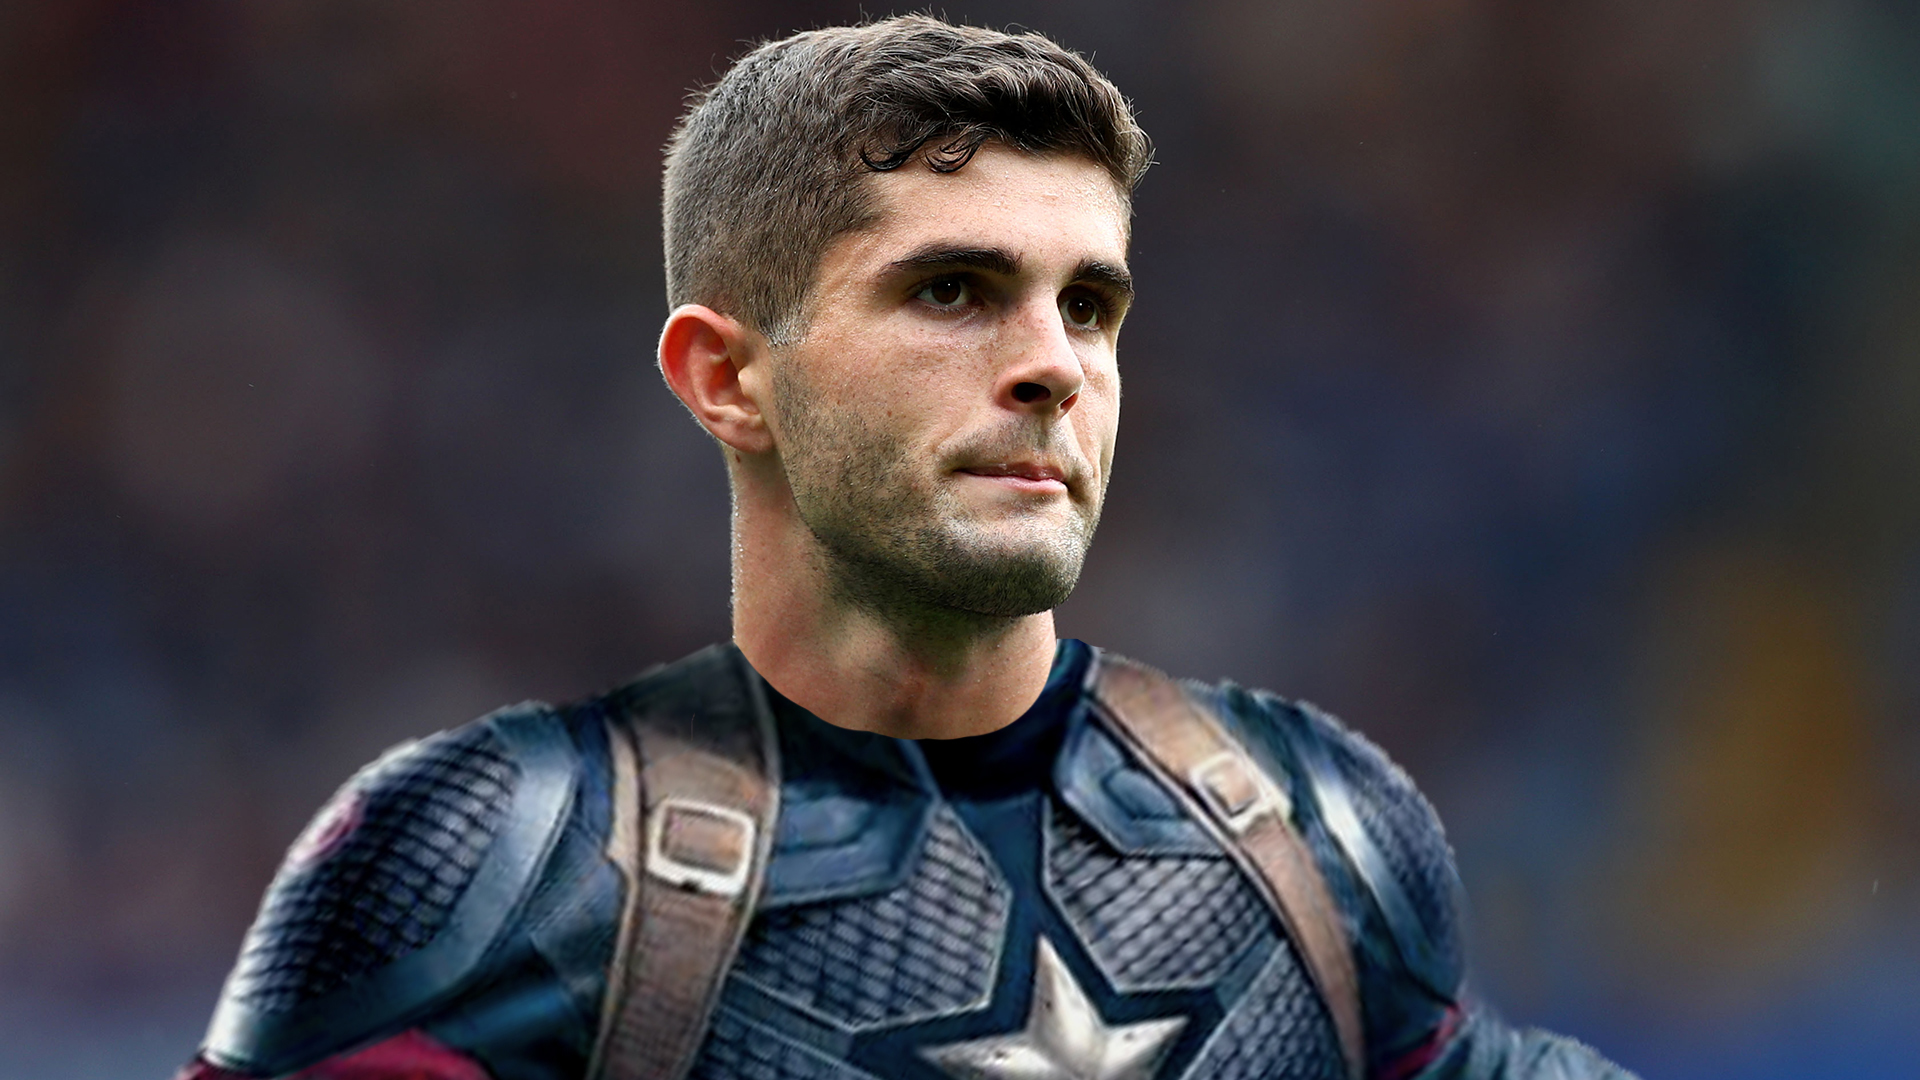 Chelsea vs Liverpool: Where is Captain America? Christian Pulisic off